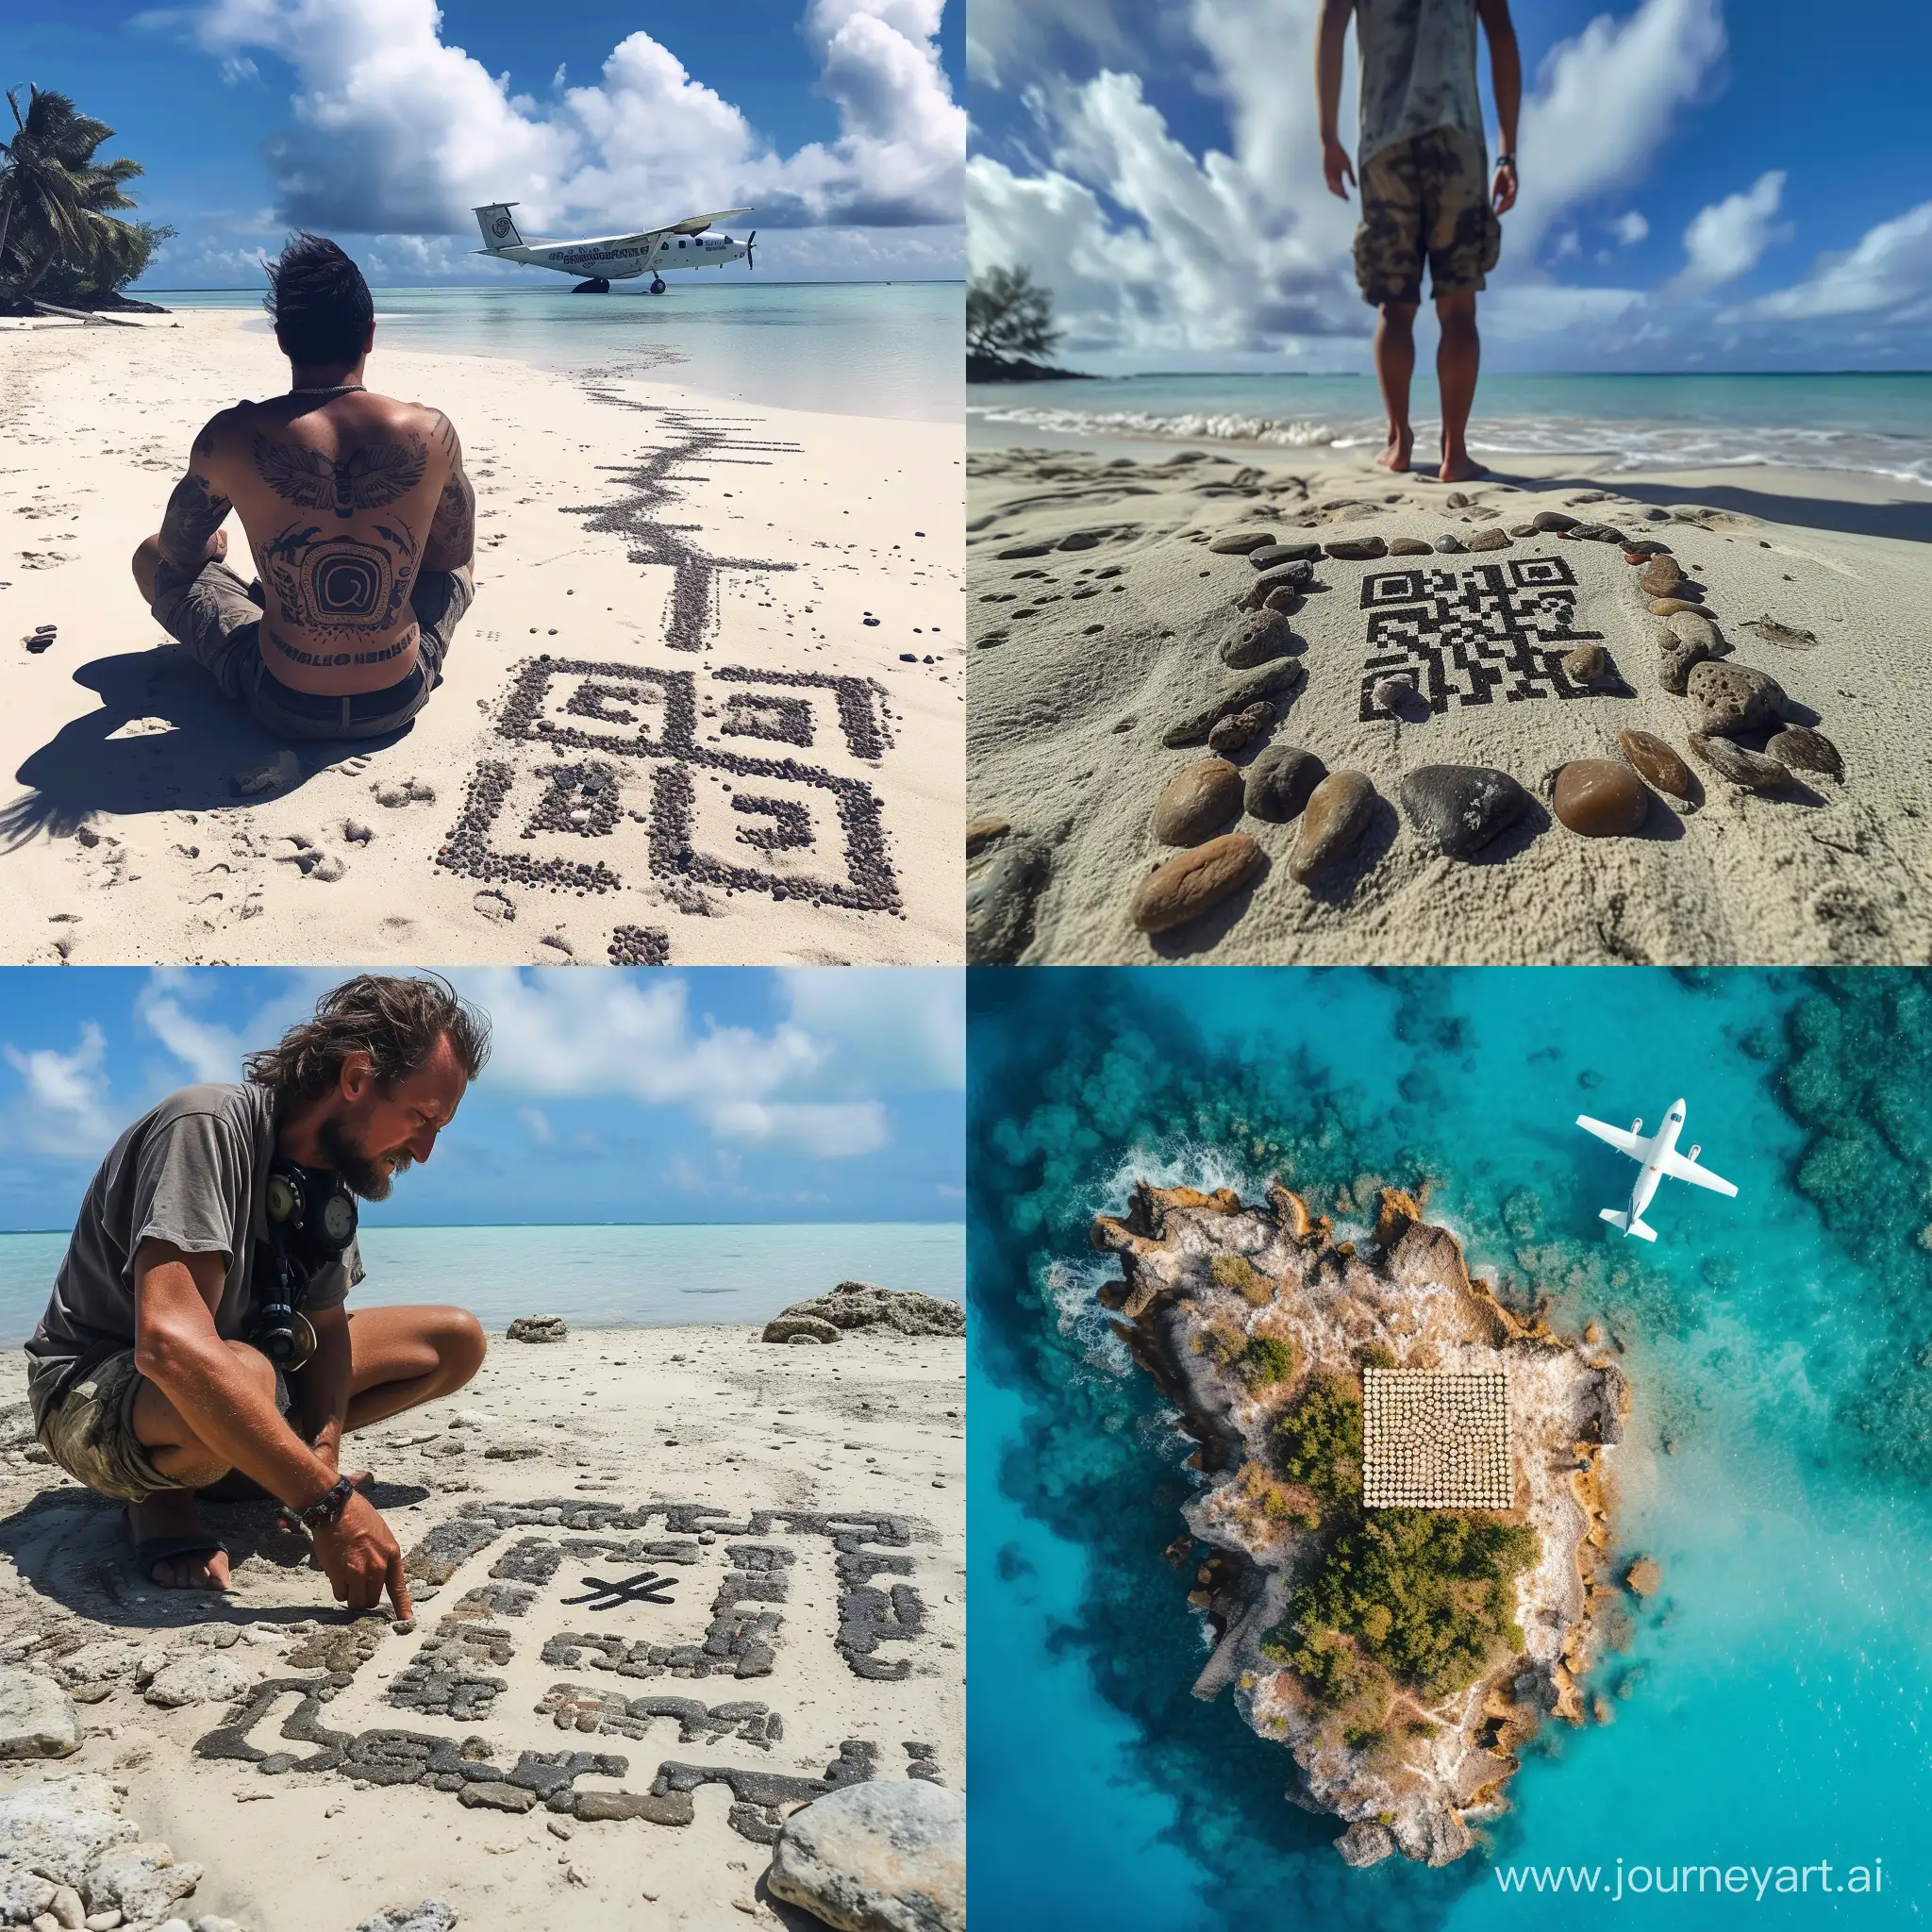 Deserted-Island-SOS-Man-Creates-QR-Code-from-Rocks-to-Signal-Planes